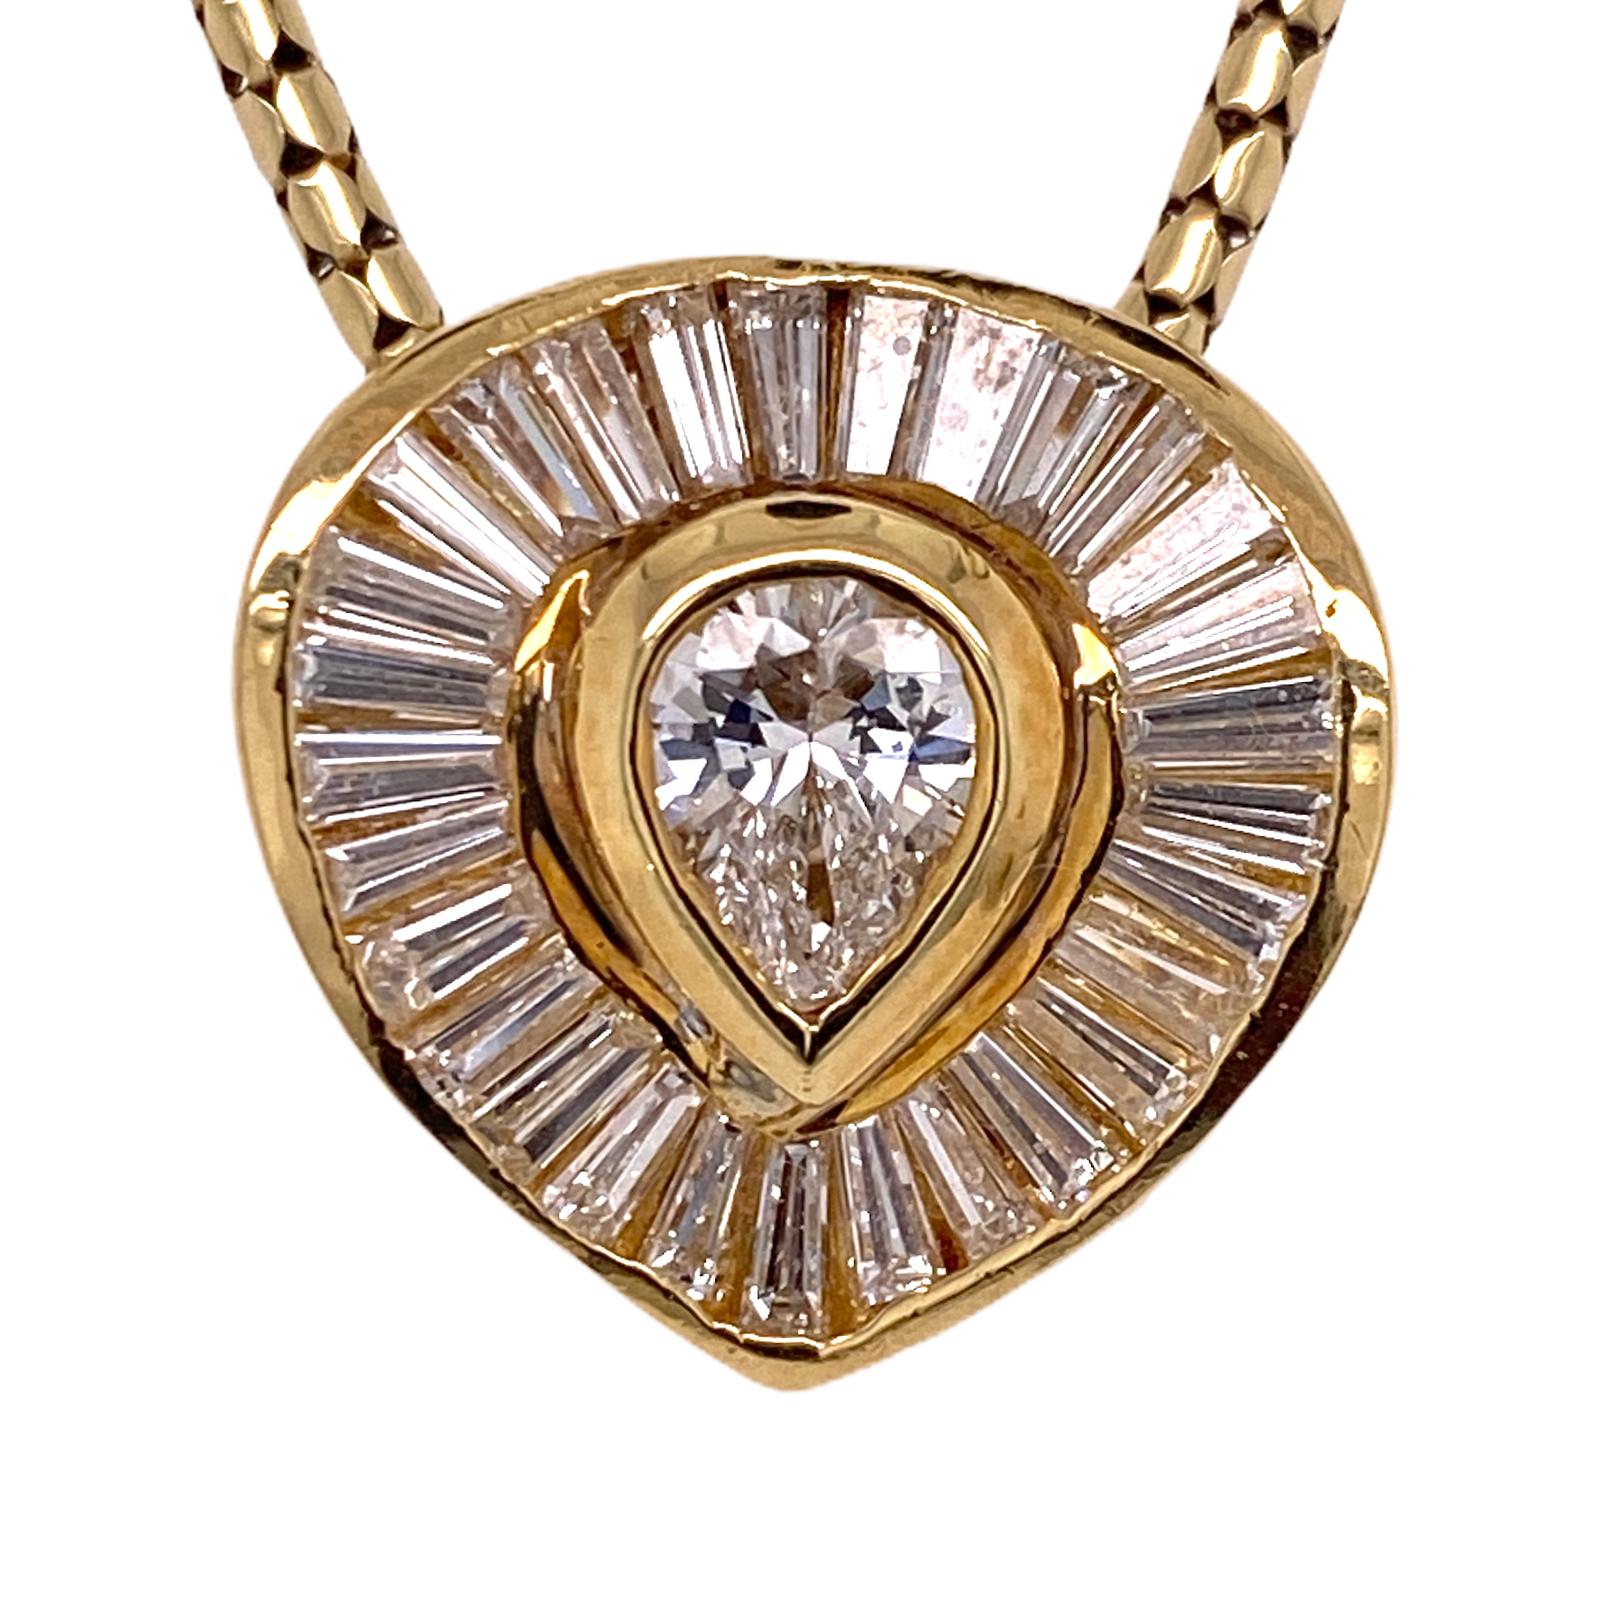 Beautiful diamond pendant fashioned in 14 karat yellow gold. The pendant features a center pear cut diamond weighing .65 carats, the diamond is surrounded by baguette cut diamonds weighing approximately 1.12 carat total weight (1.77 CTW). The